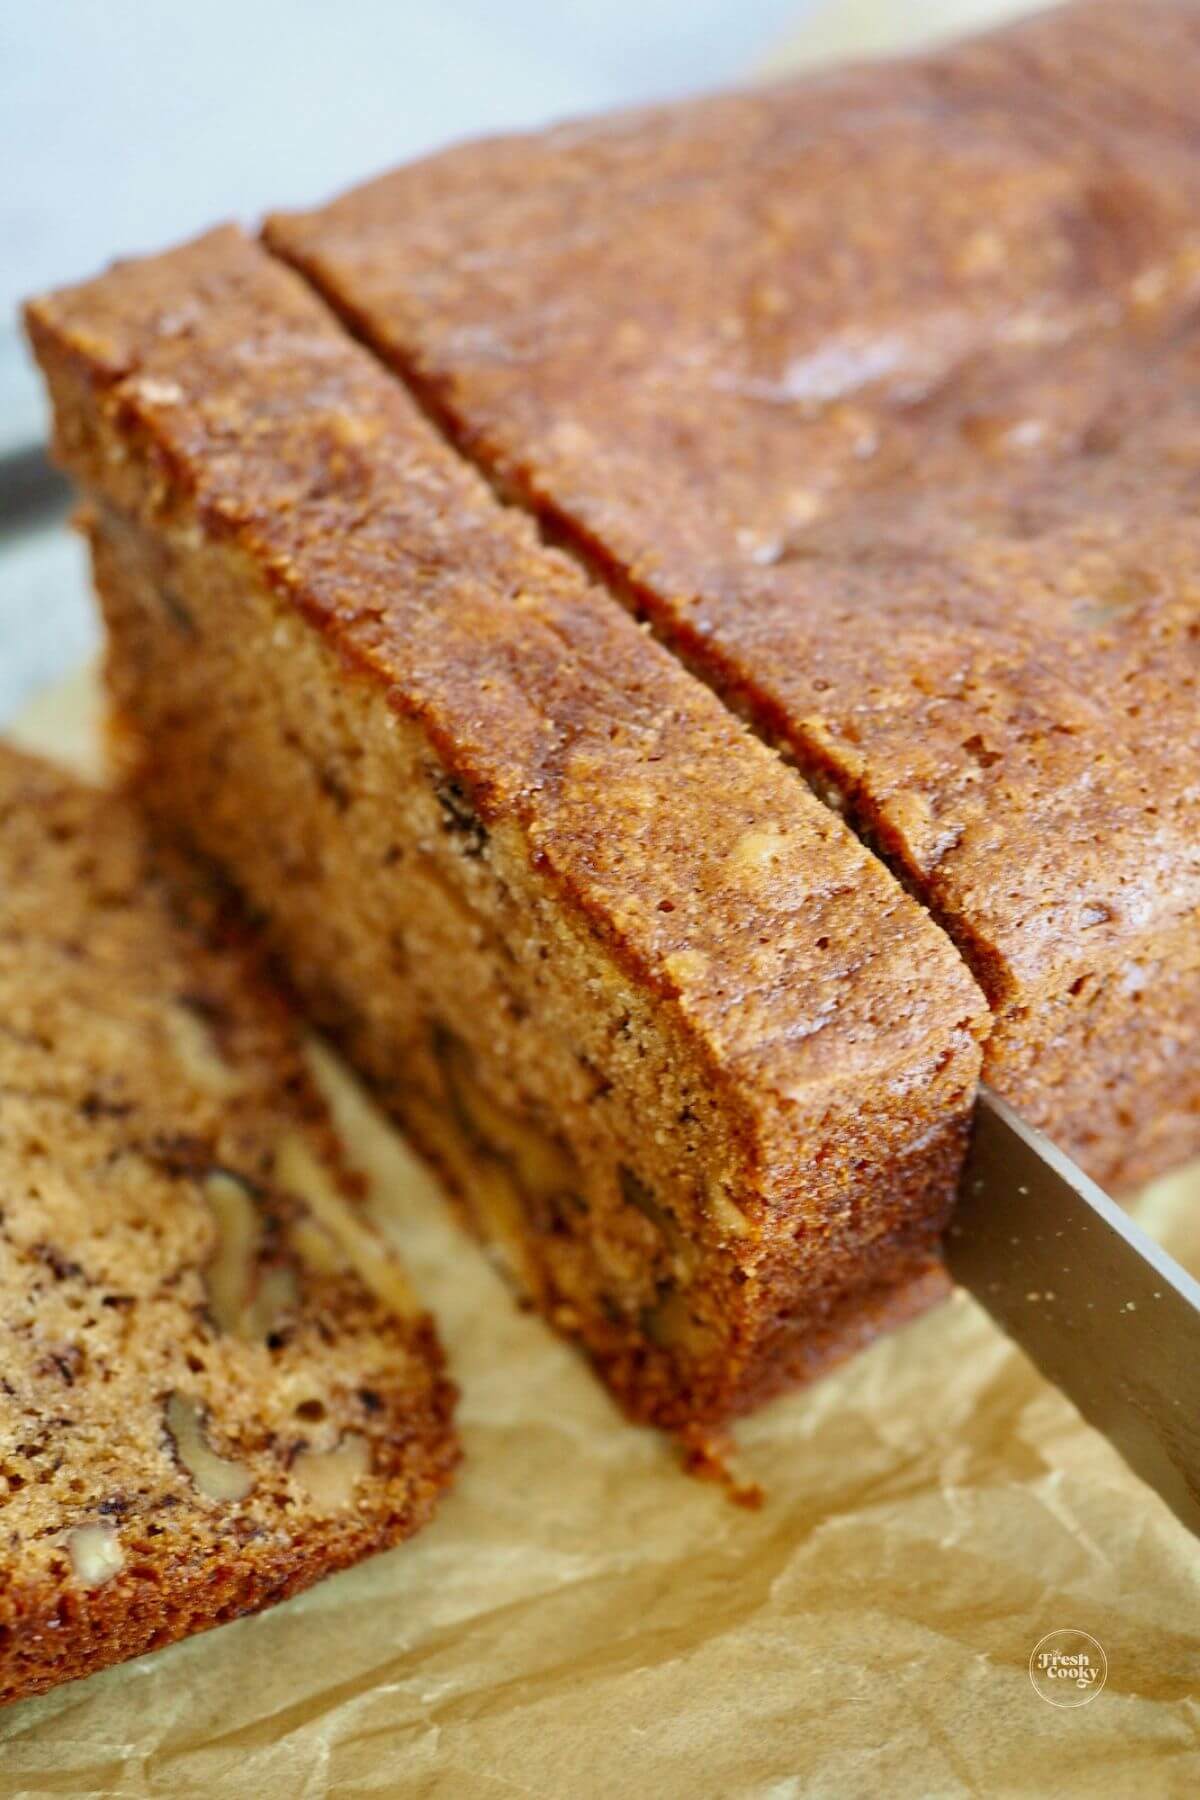 Slicing a thick slice of banana bread laced with walnuts.